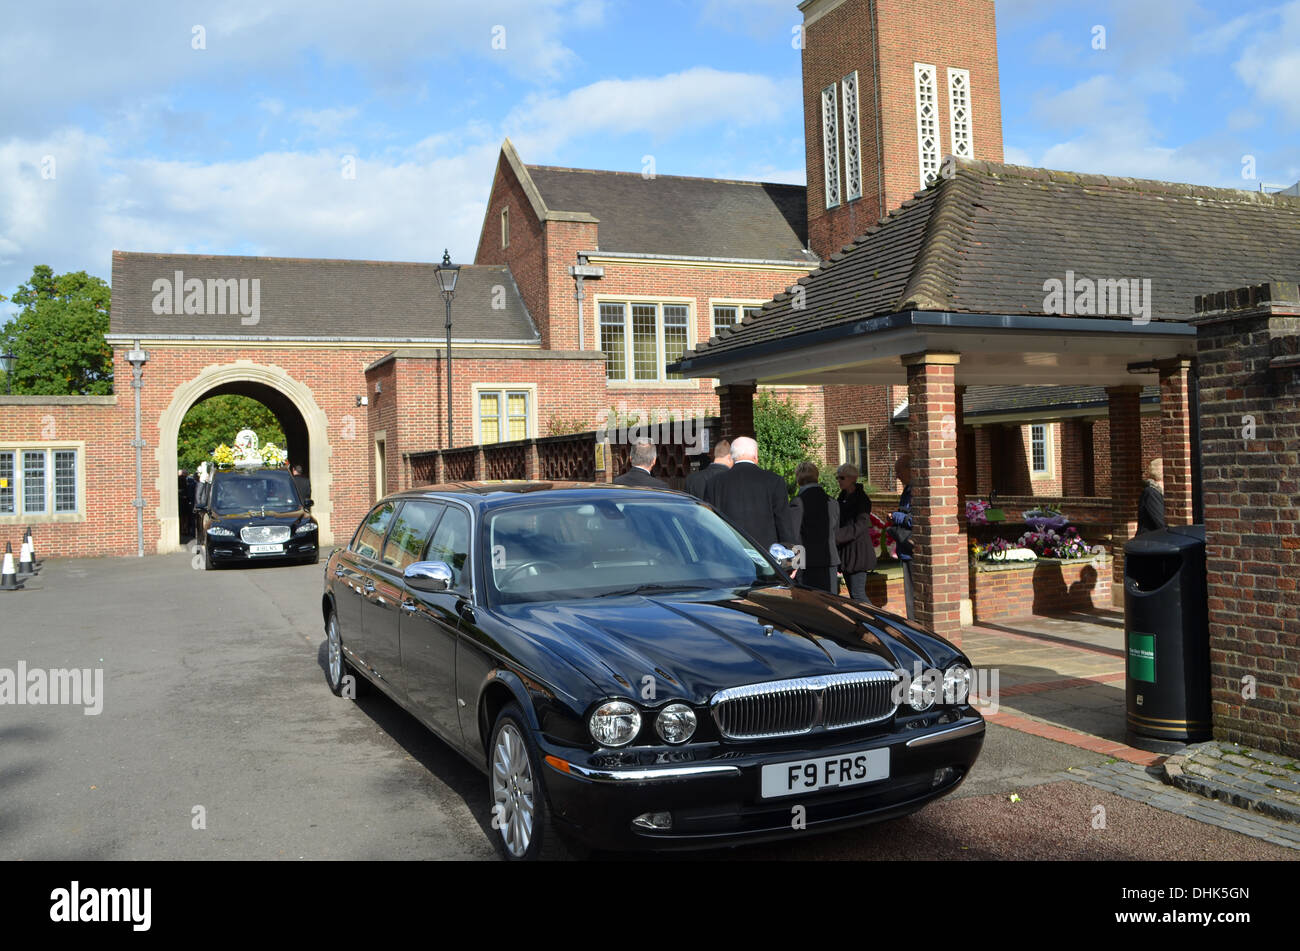 A  cremation is the preferred method of burial nowadays.The cars wait outside  the crematorium. Stock Photo